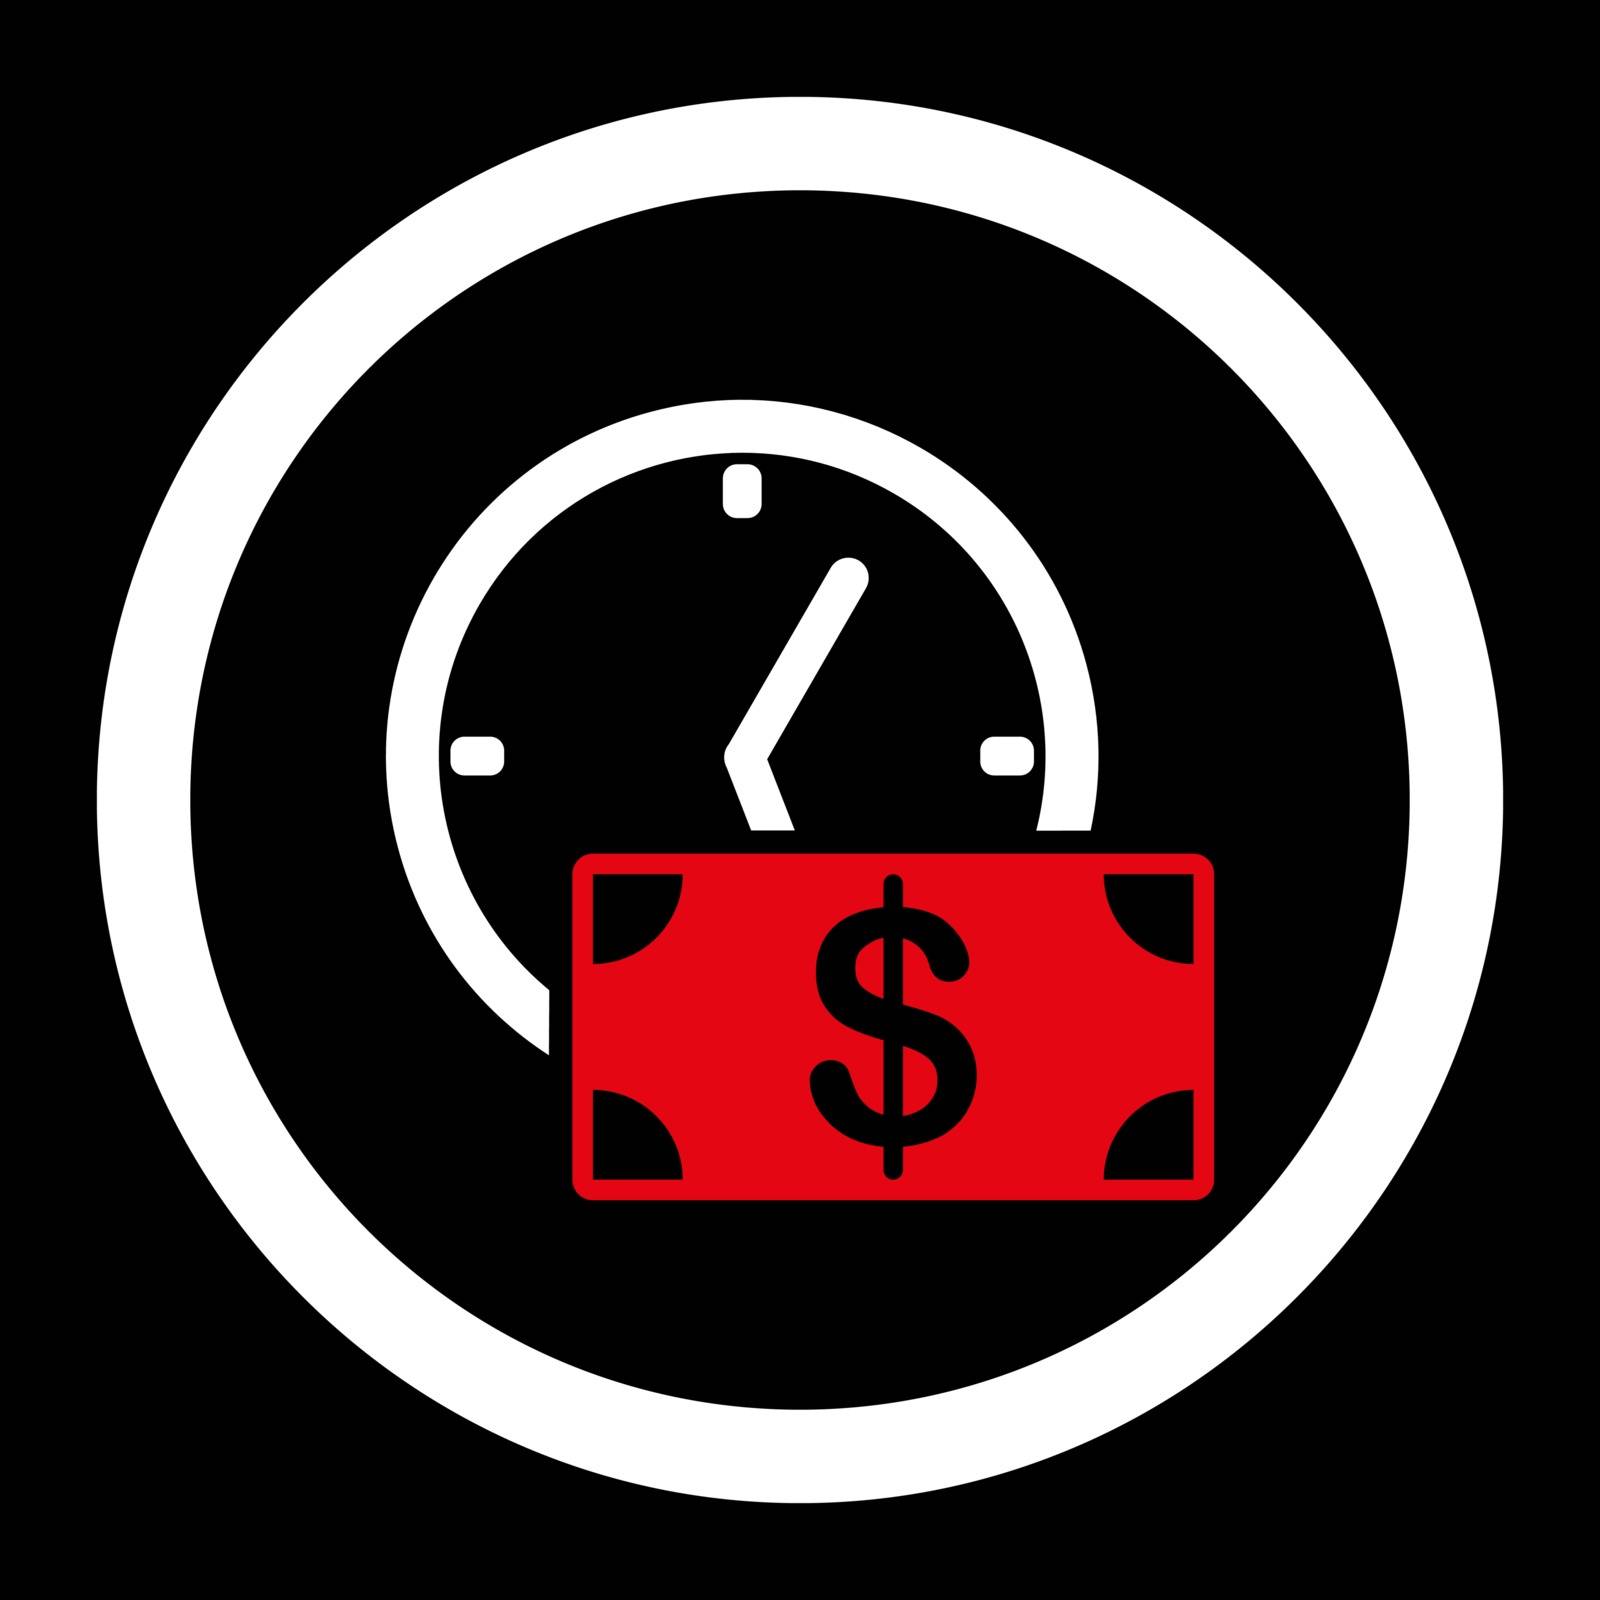 Credit vector icon. This flat rounded symbol uses red and white colors and isolated on a black background.